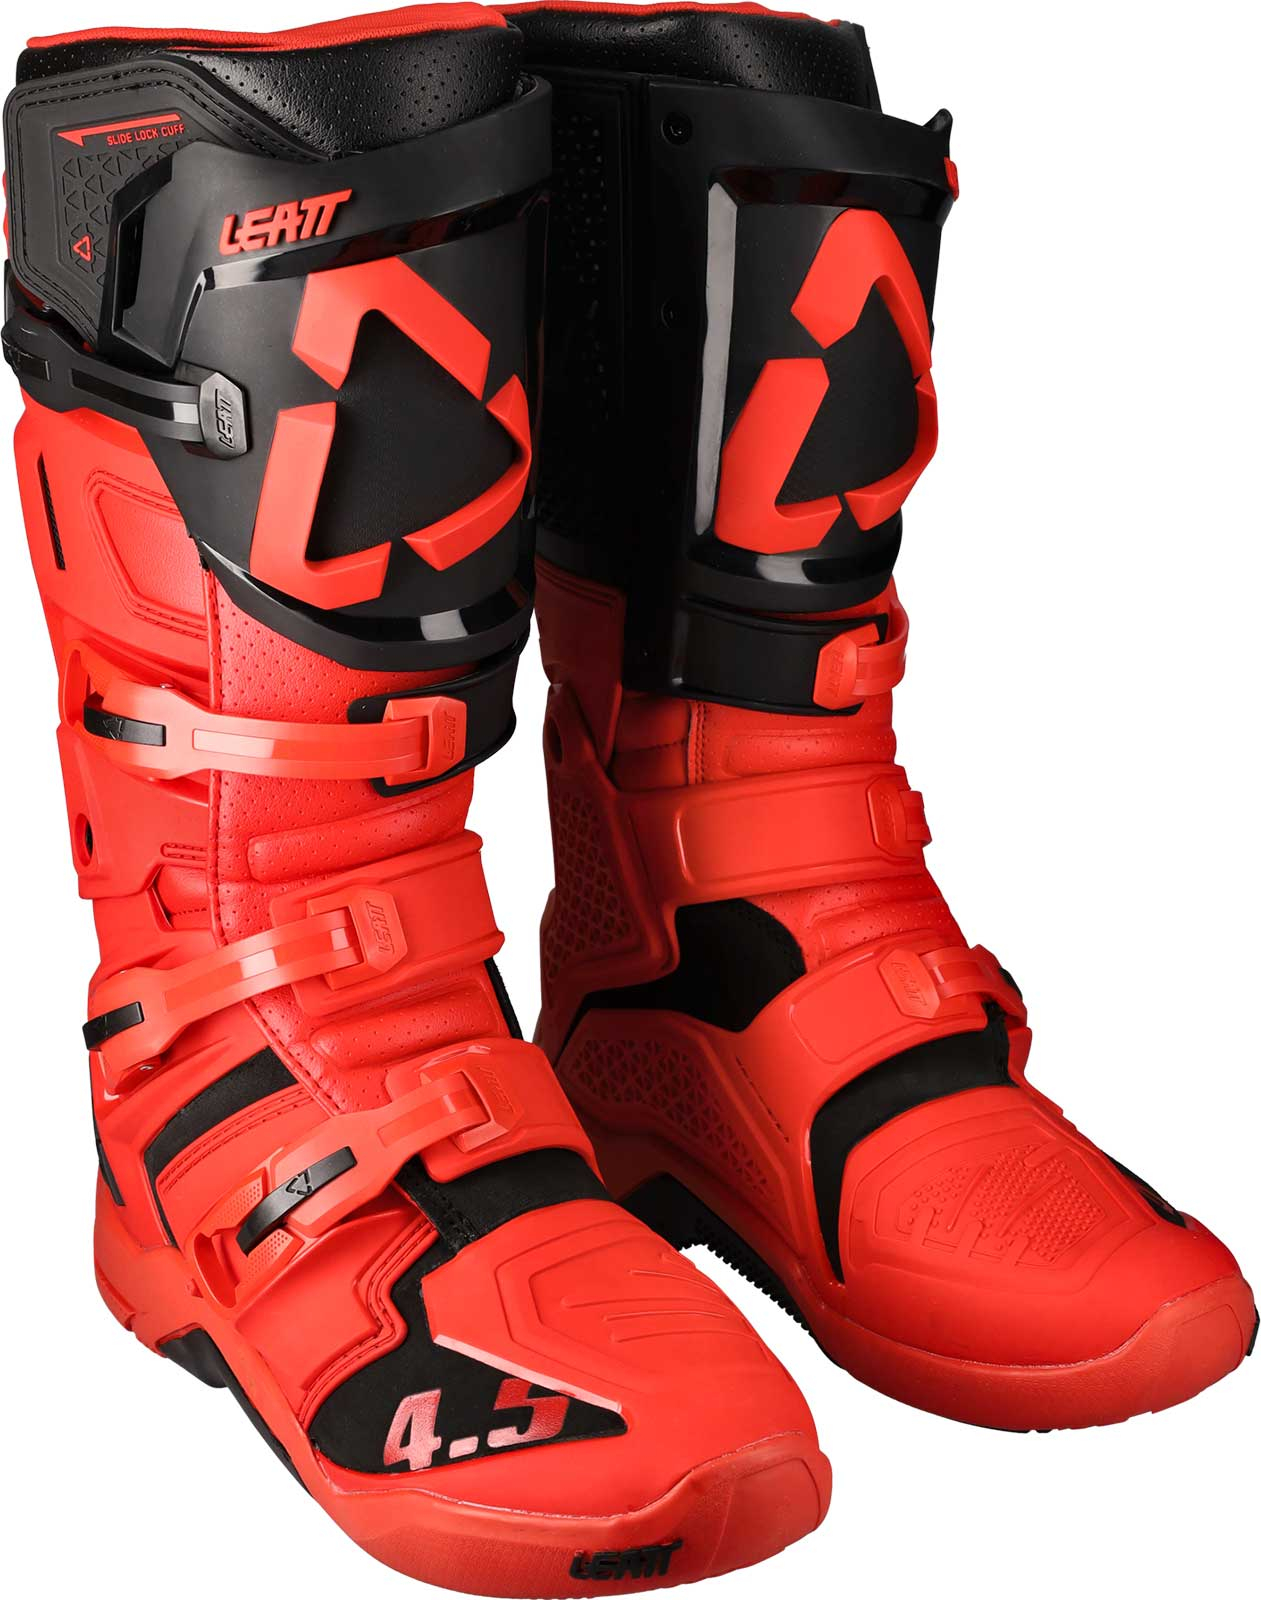 Aqua1 Young Person Motor Sport Boots in UK Size 4 & 5 